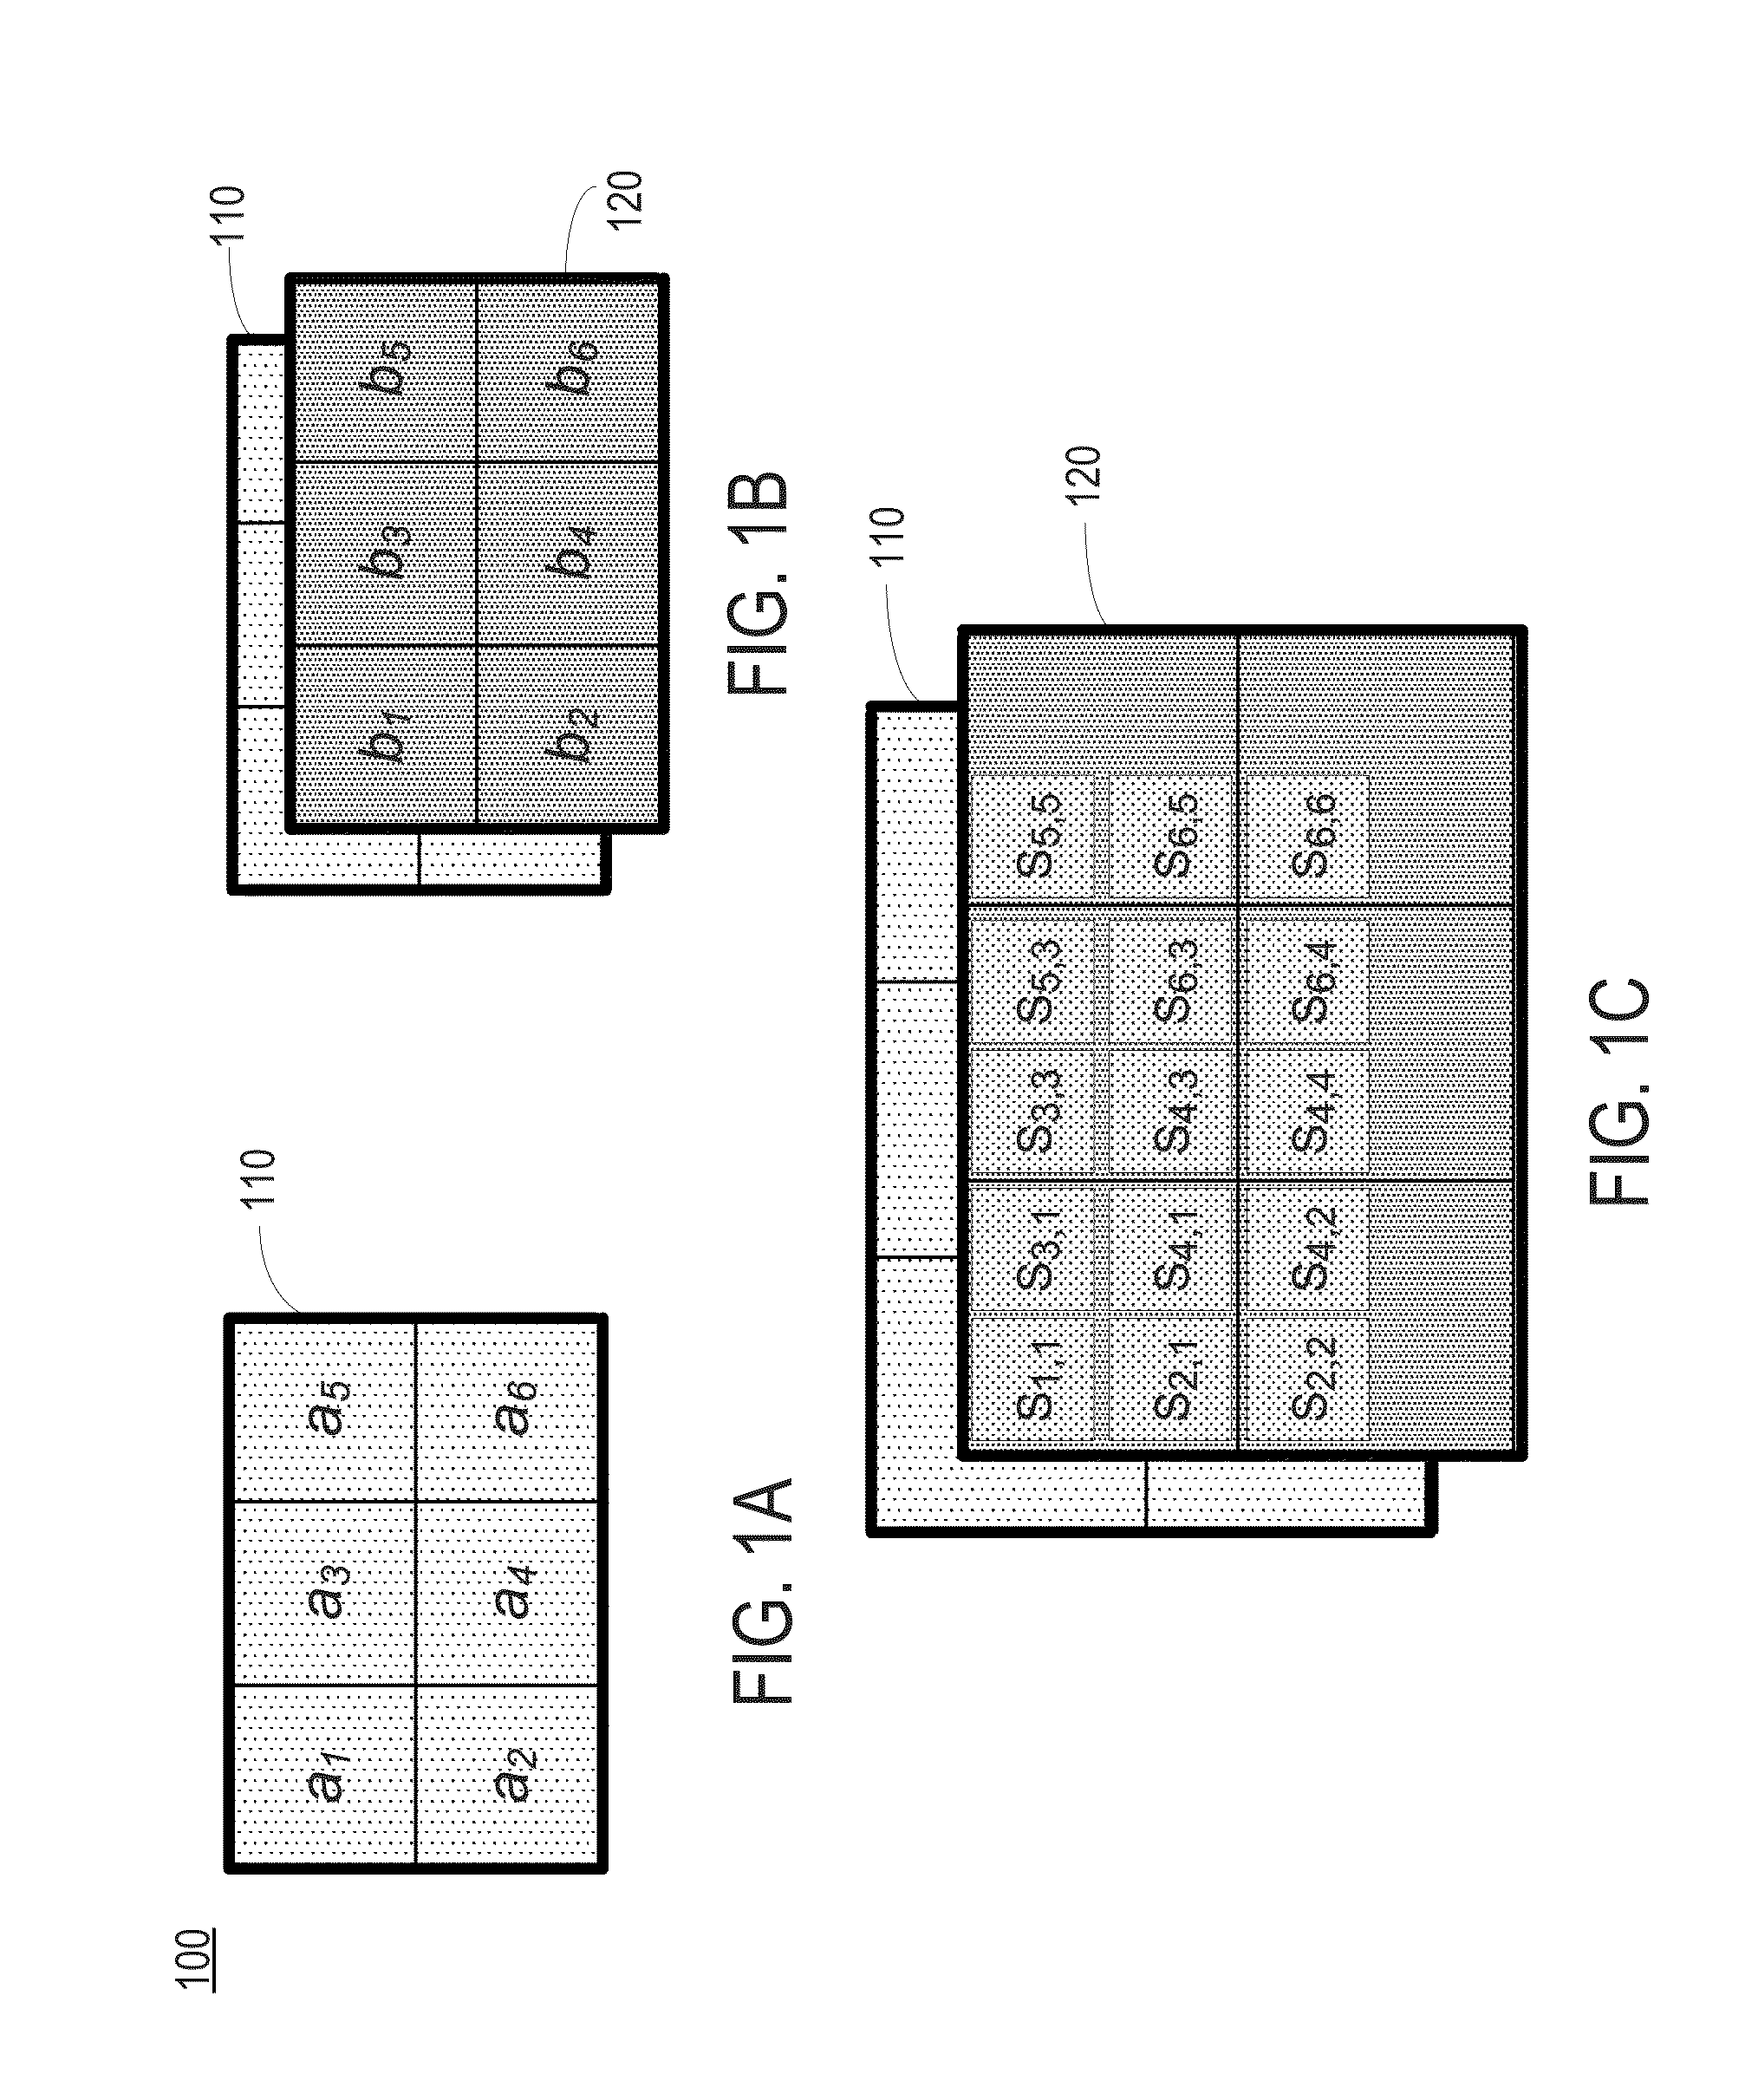 Superresolution display using cascaded panels